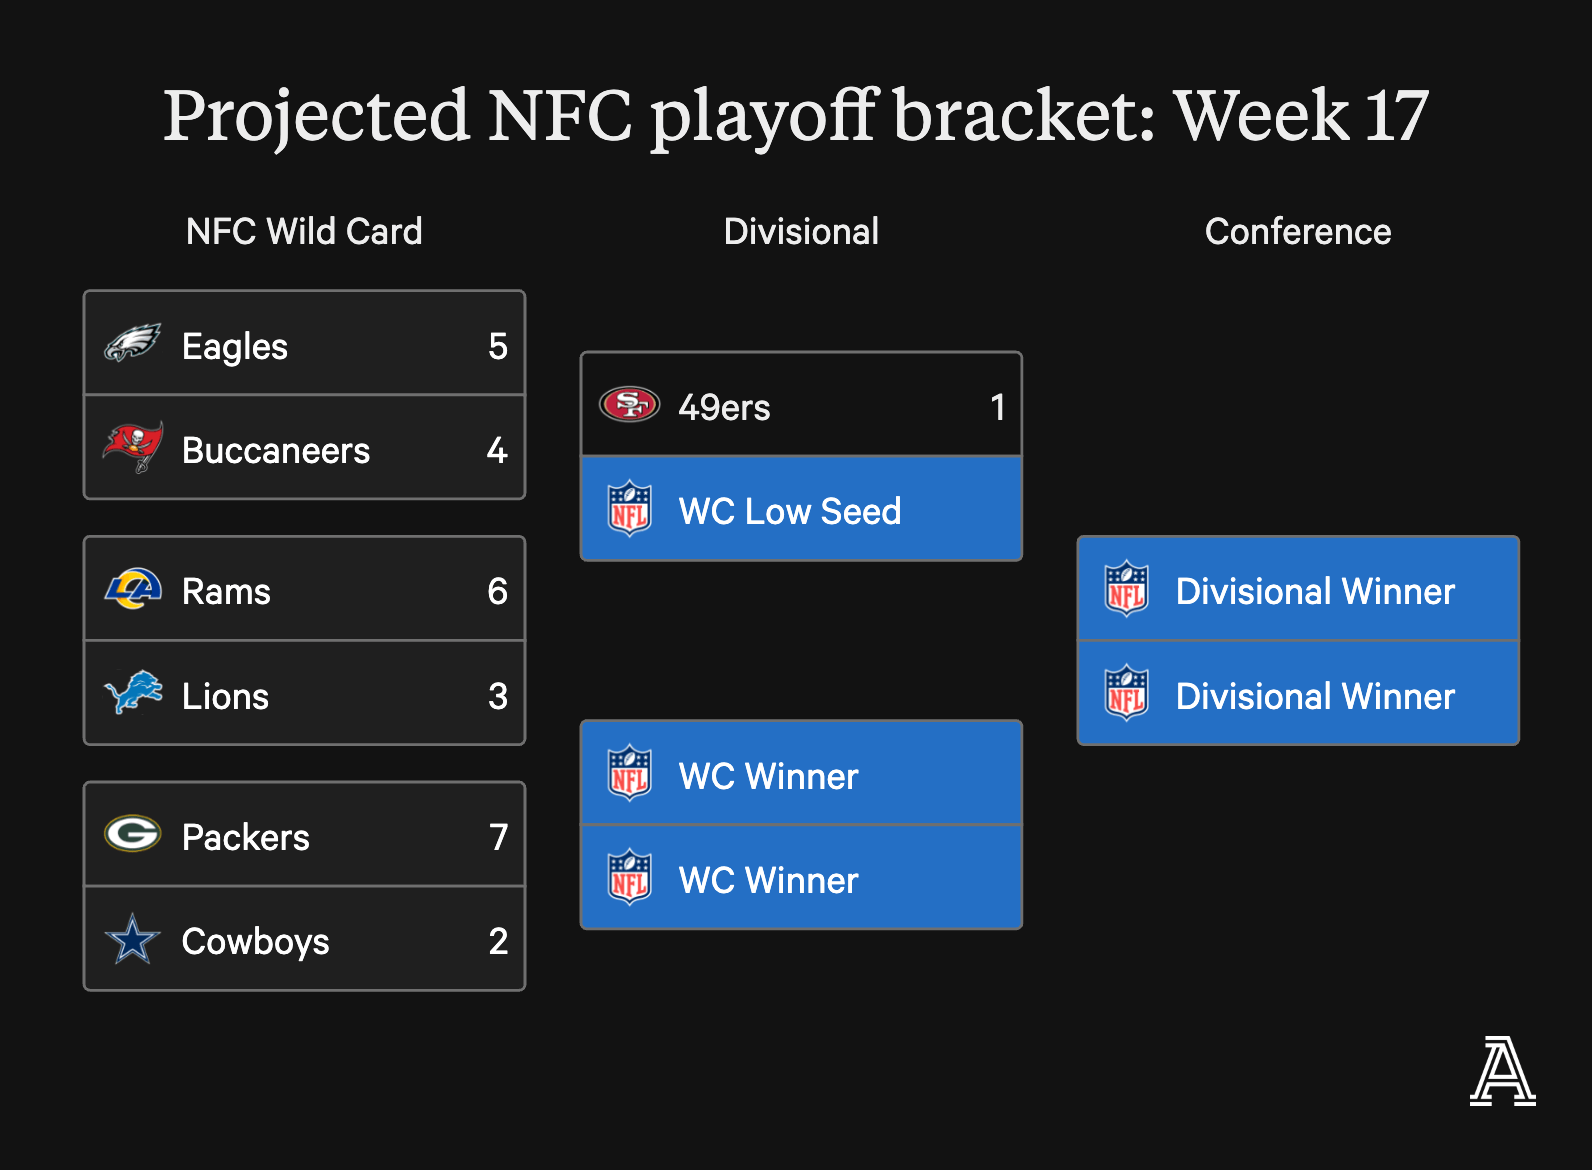 NFCBracket_W17_Packers%402x.png